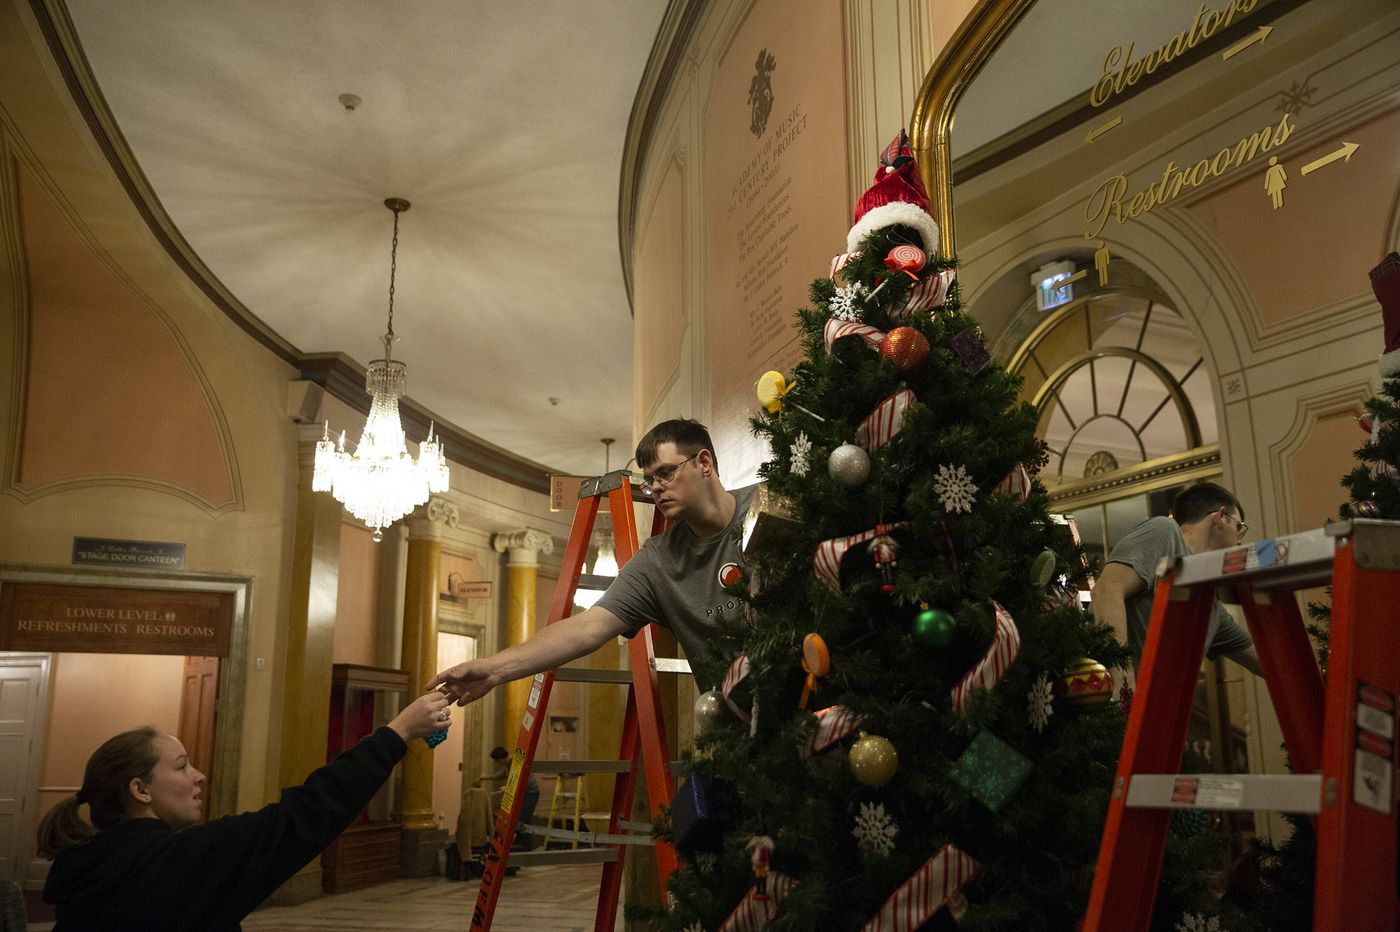 Christmas whiff: A custom ‘Nutcracker’ scent will infuse the Academy of Music lobby